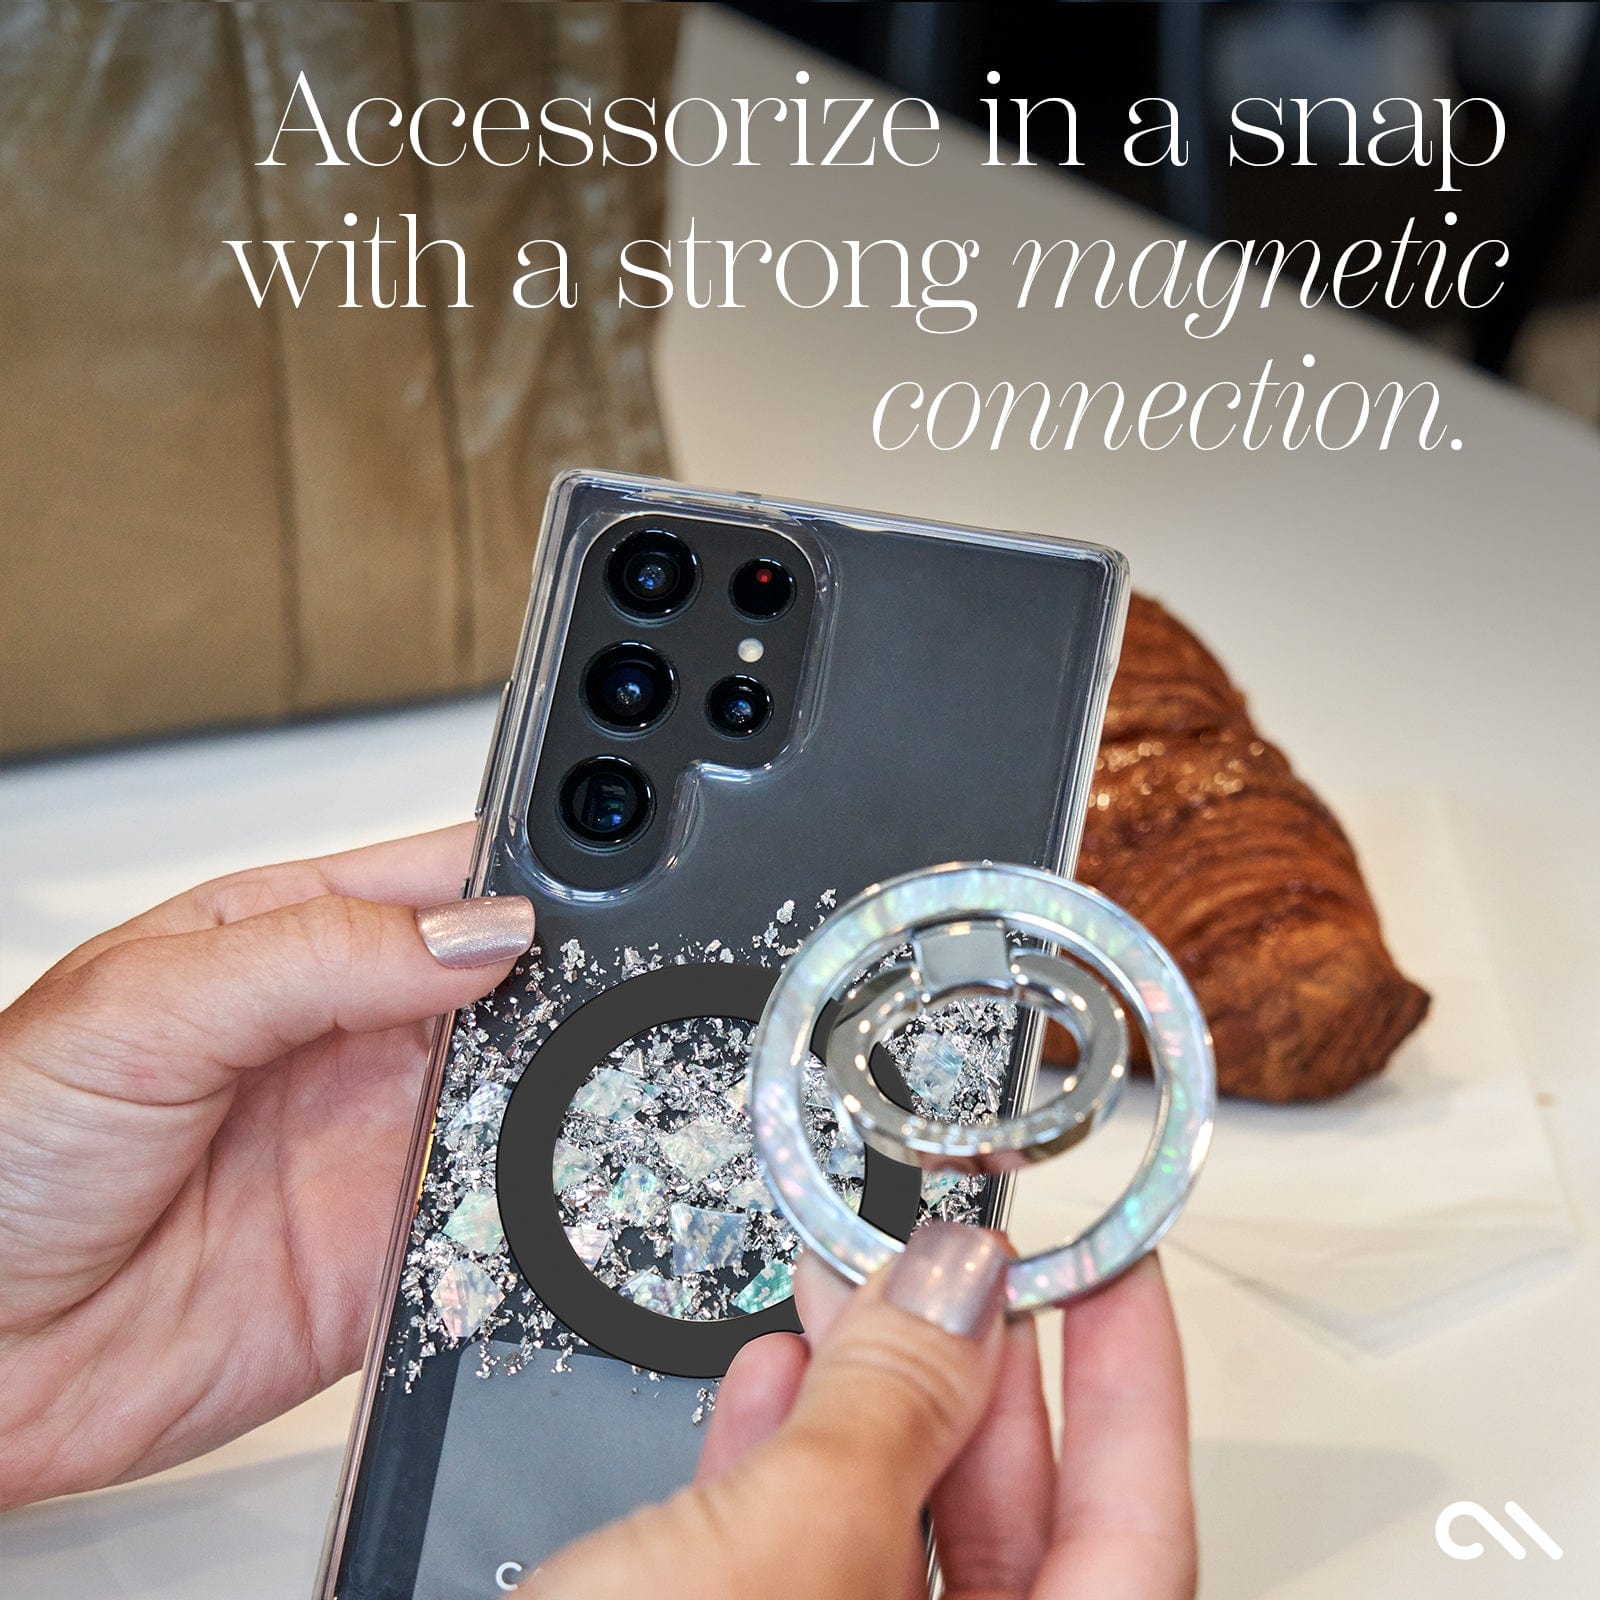 ACCESSORIZE IN A SNAP WITH A STRONG MAGNETIC CONNECTON